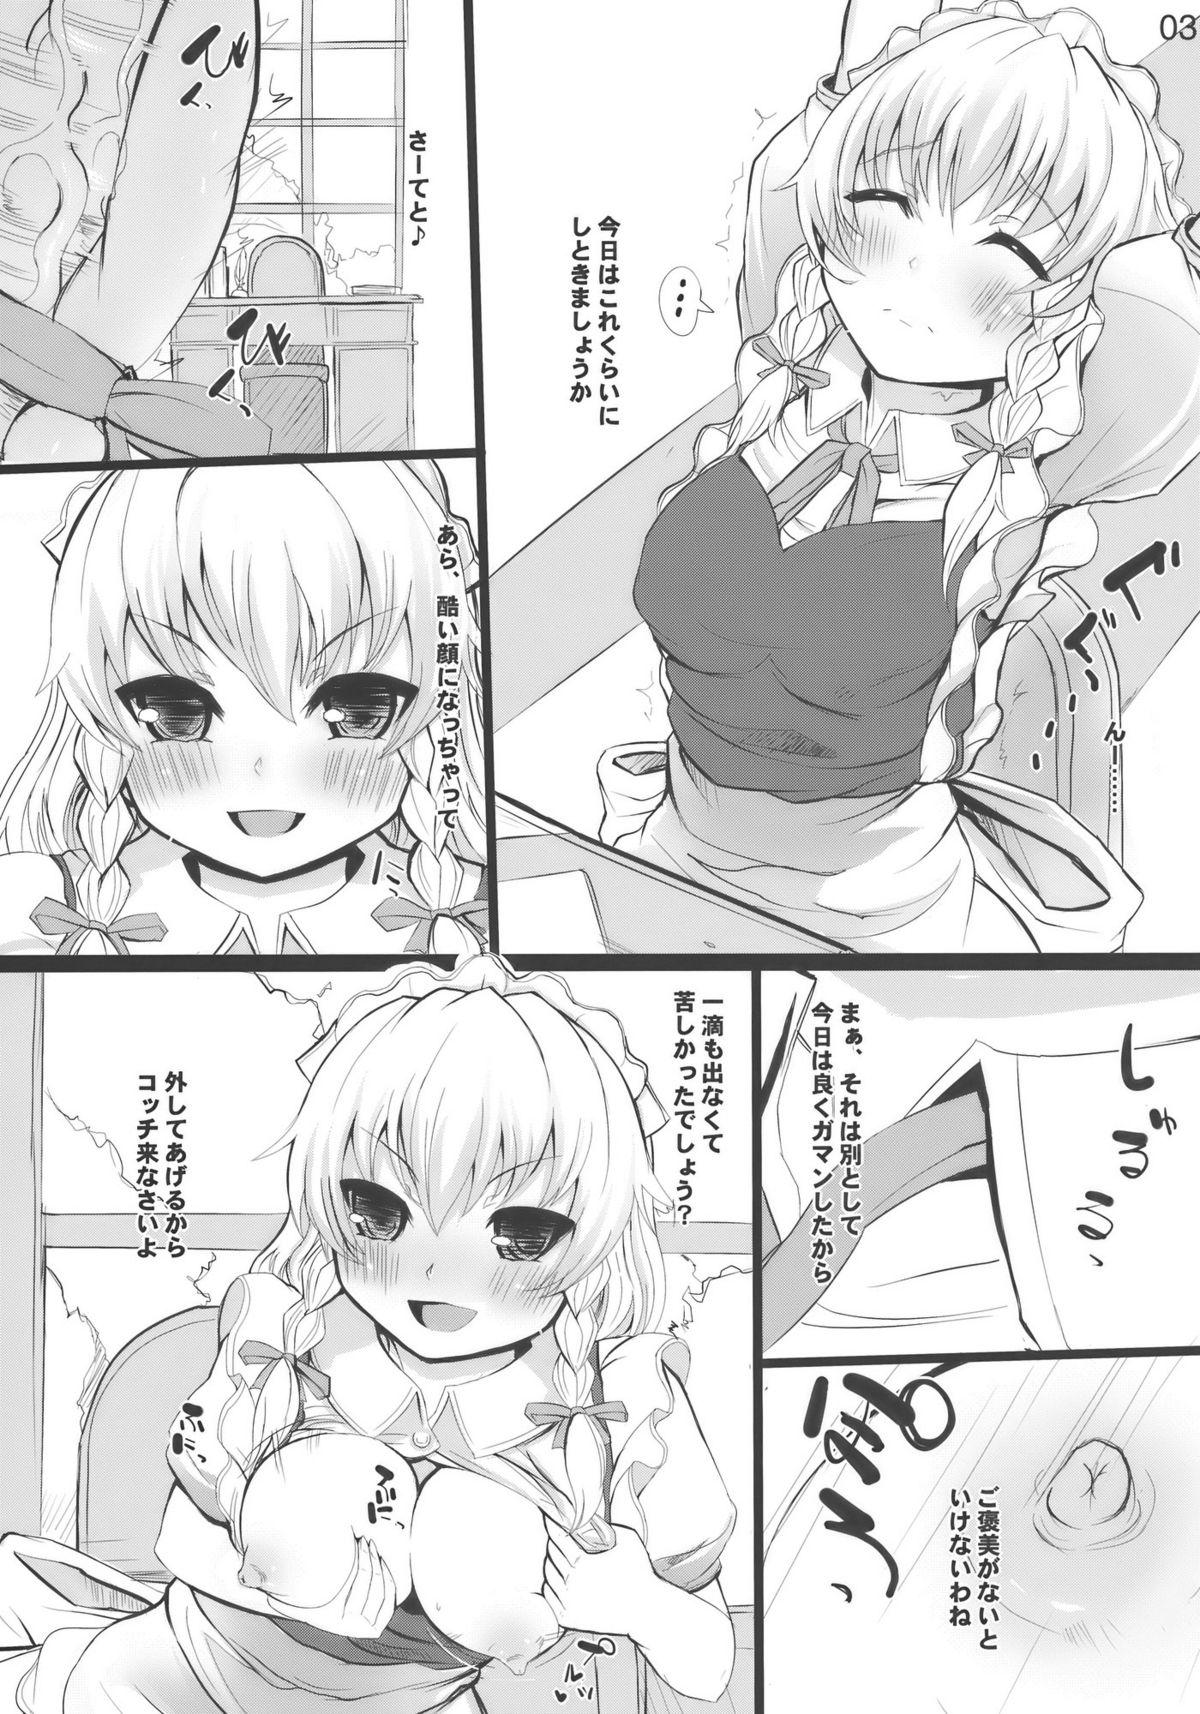 Money Talks Feed me with your Kiss - Touhou project Housewife - Page 3